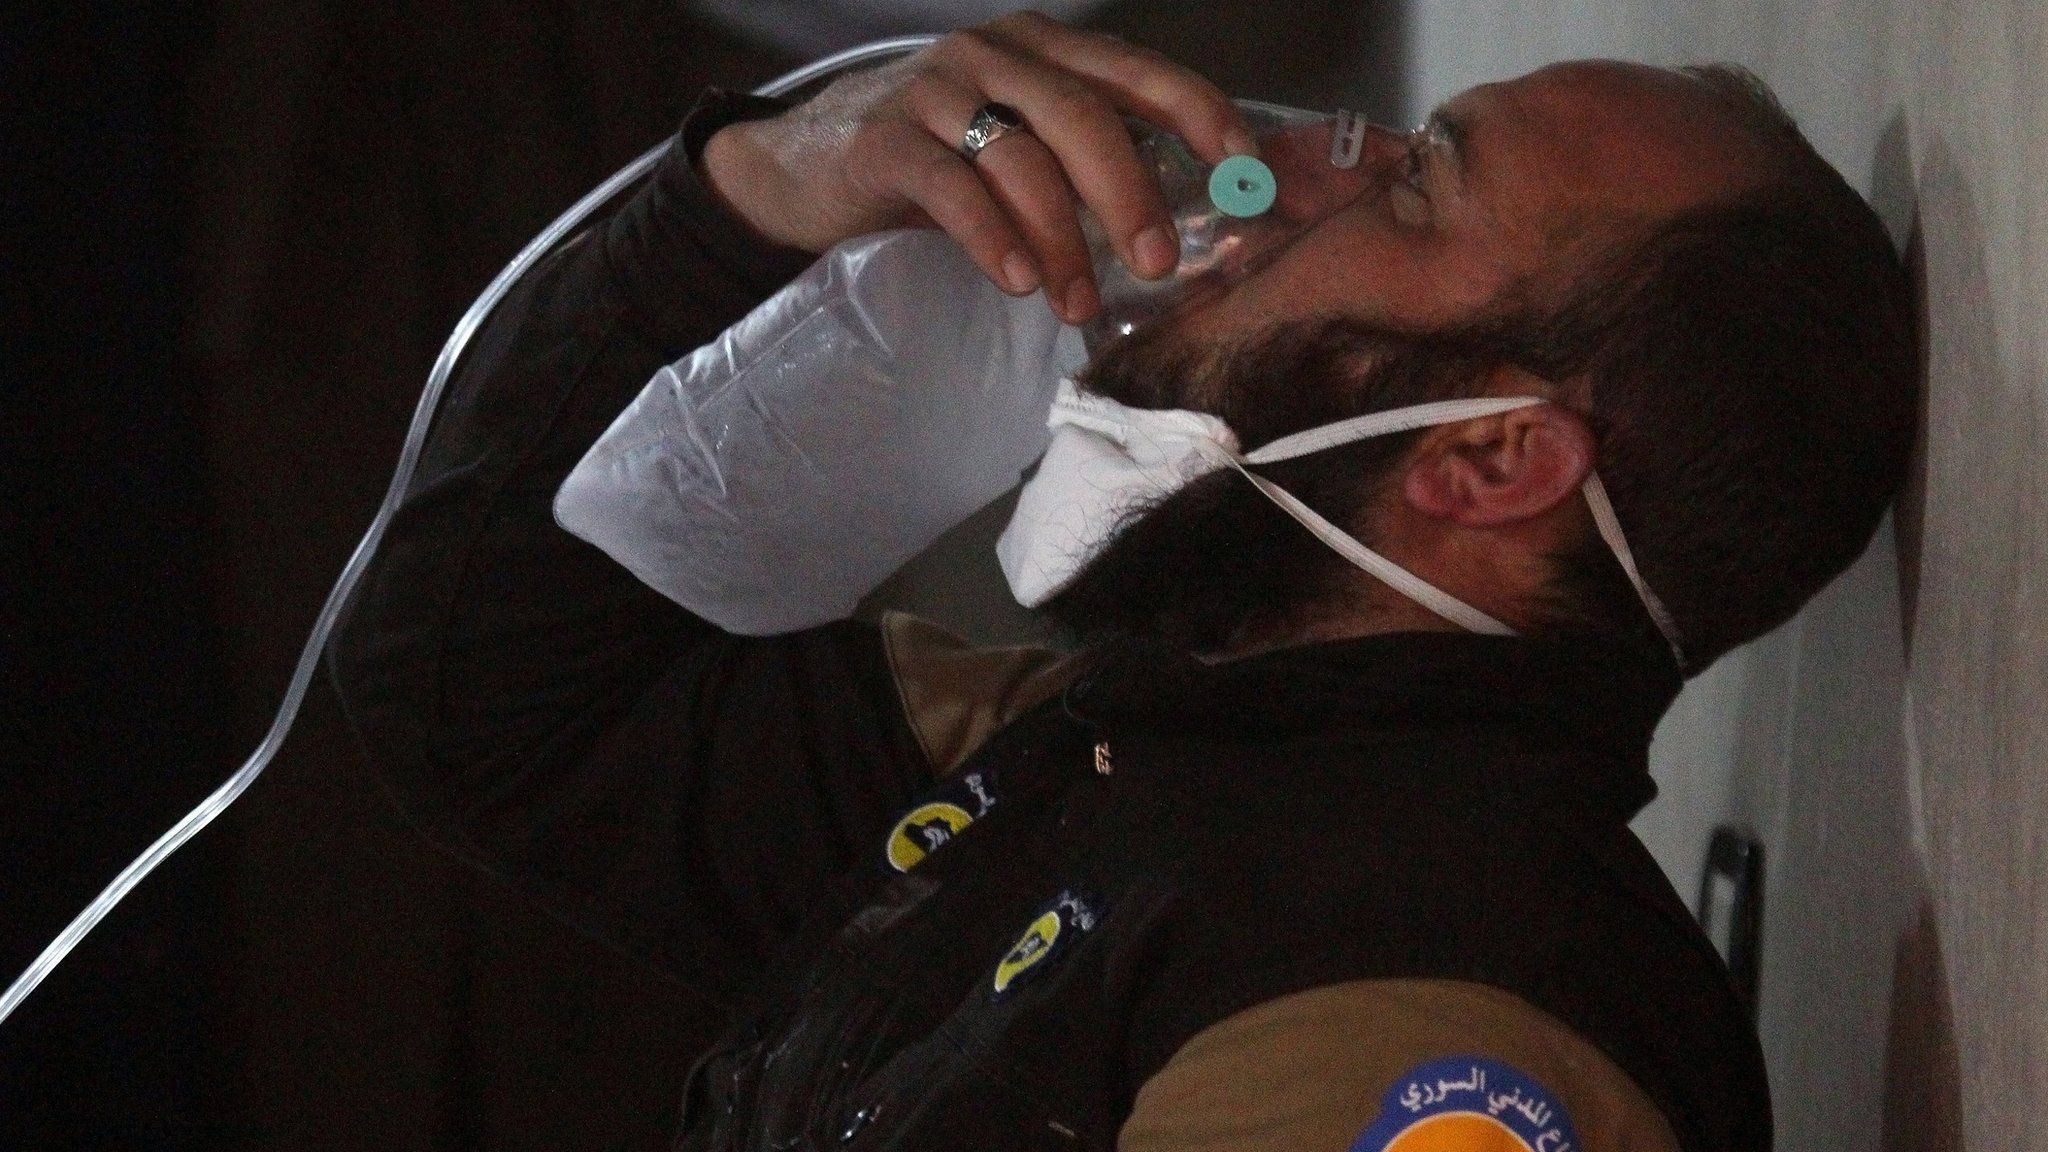 A civil defence worker breathes through an oxygen mask, after a suspected gas attack in the town of Khan Sheikhoun in rebel-held Idlib, Syria, April 4, 2017